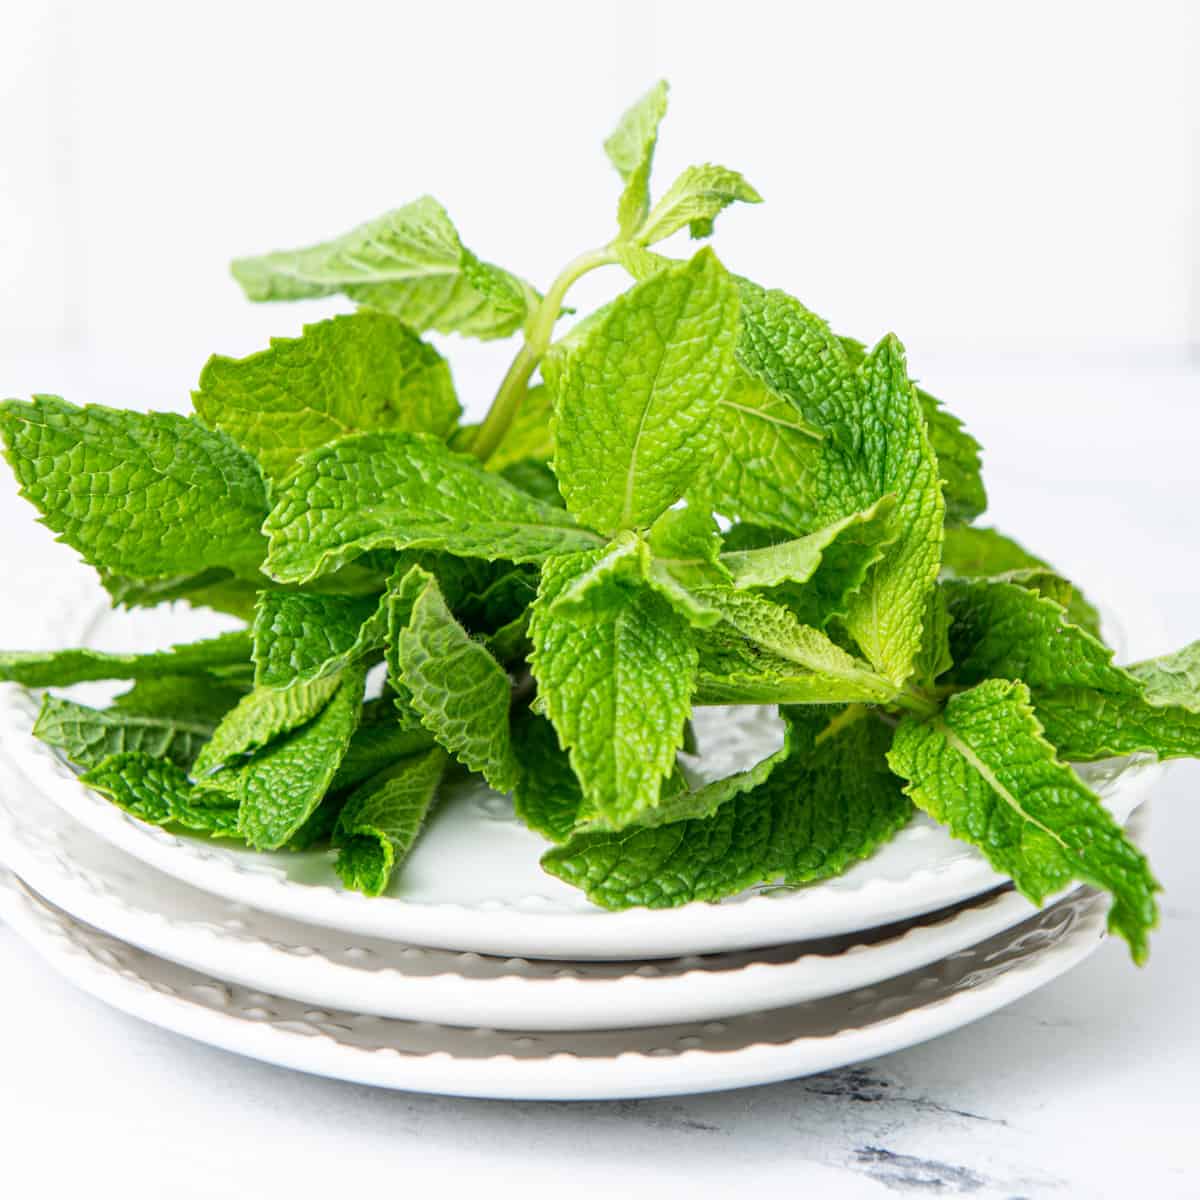 Mint leaves on white plates.